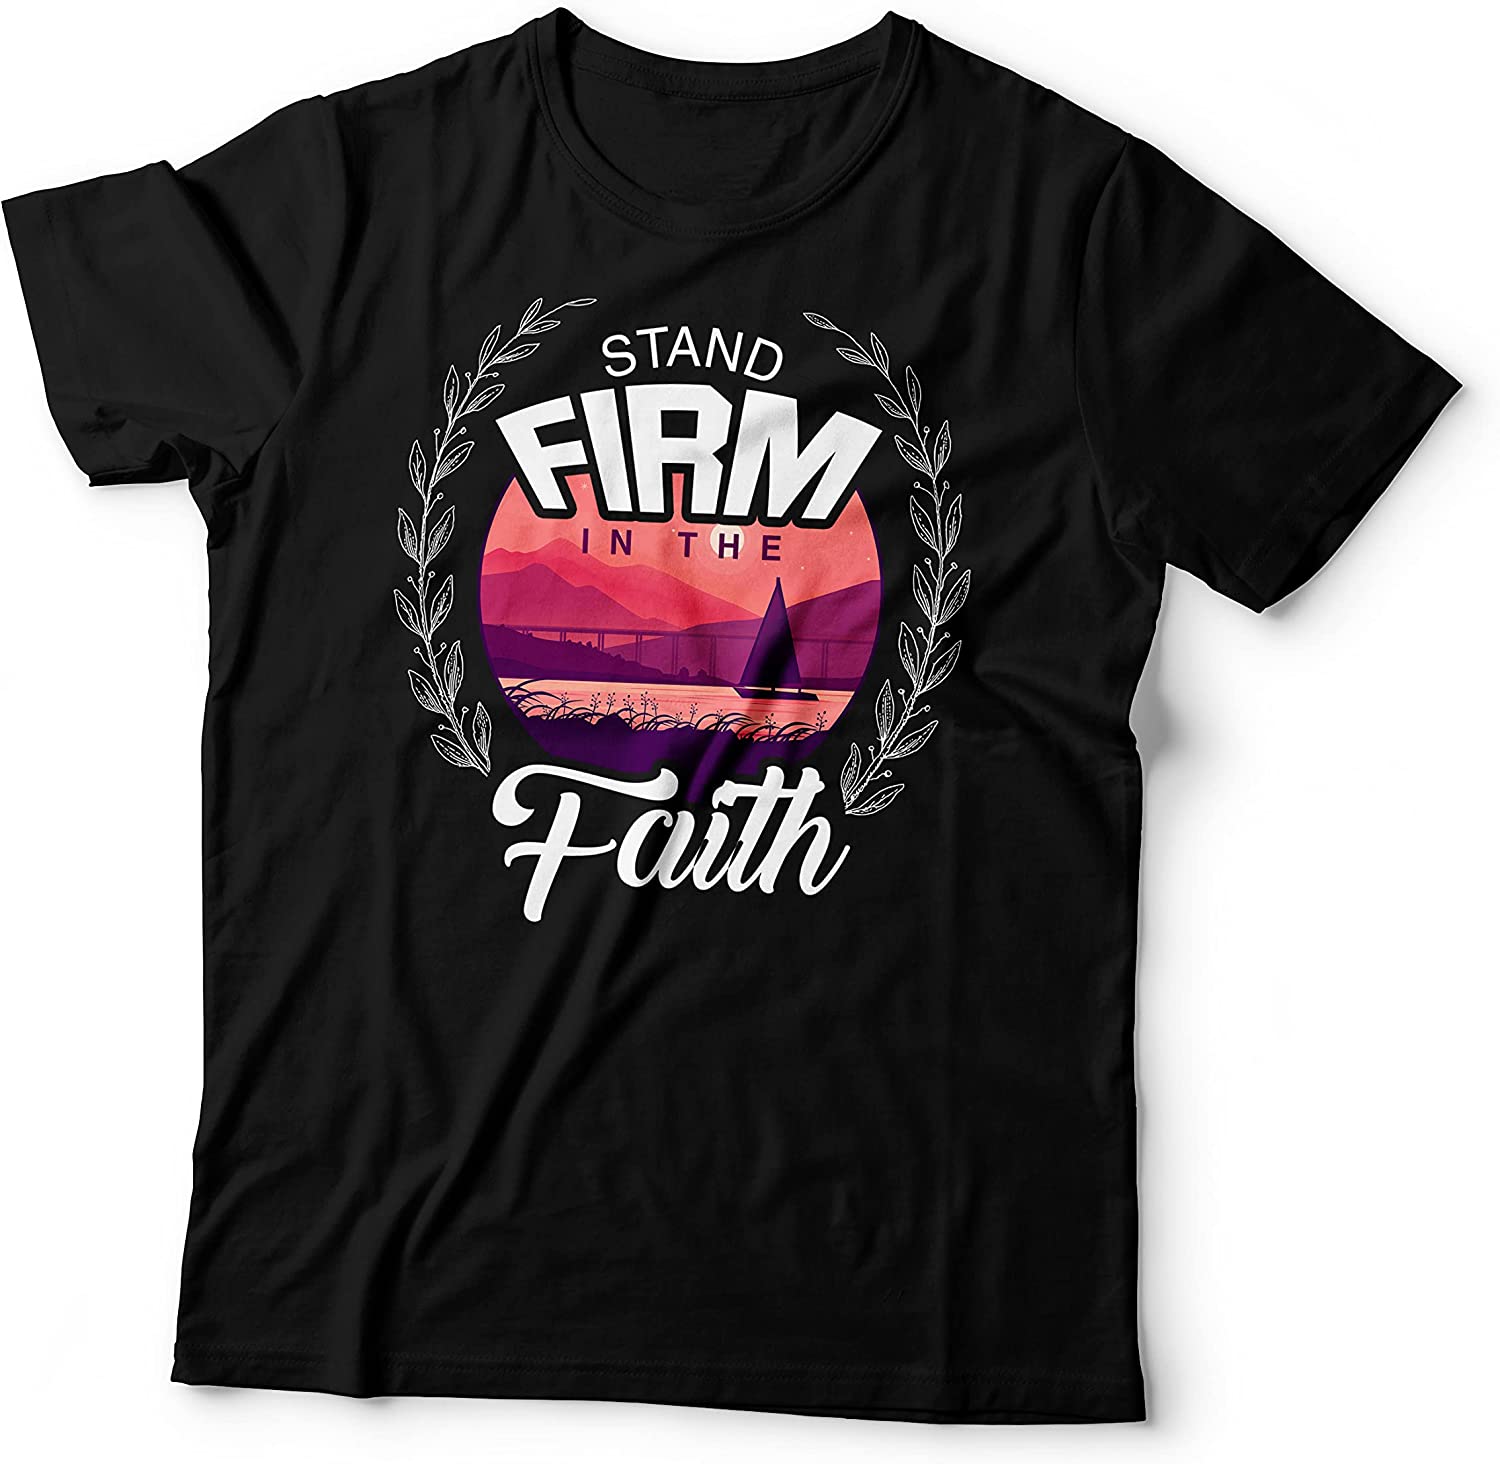 Stand Firm in the Faith T-shirt Black-Large